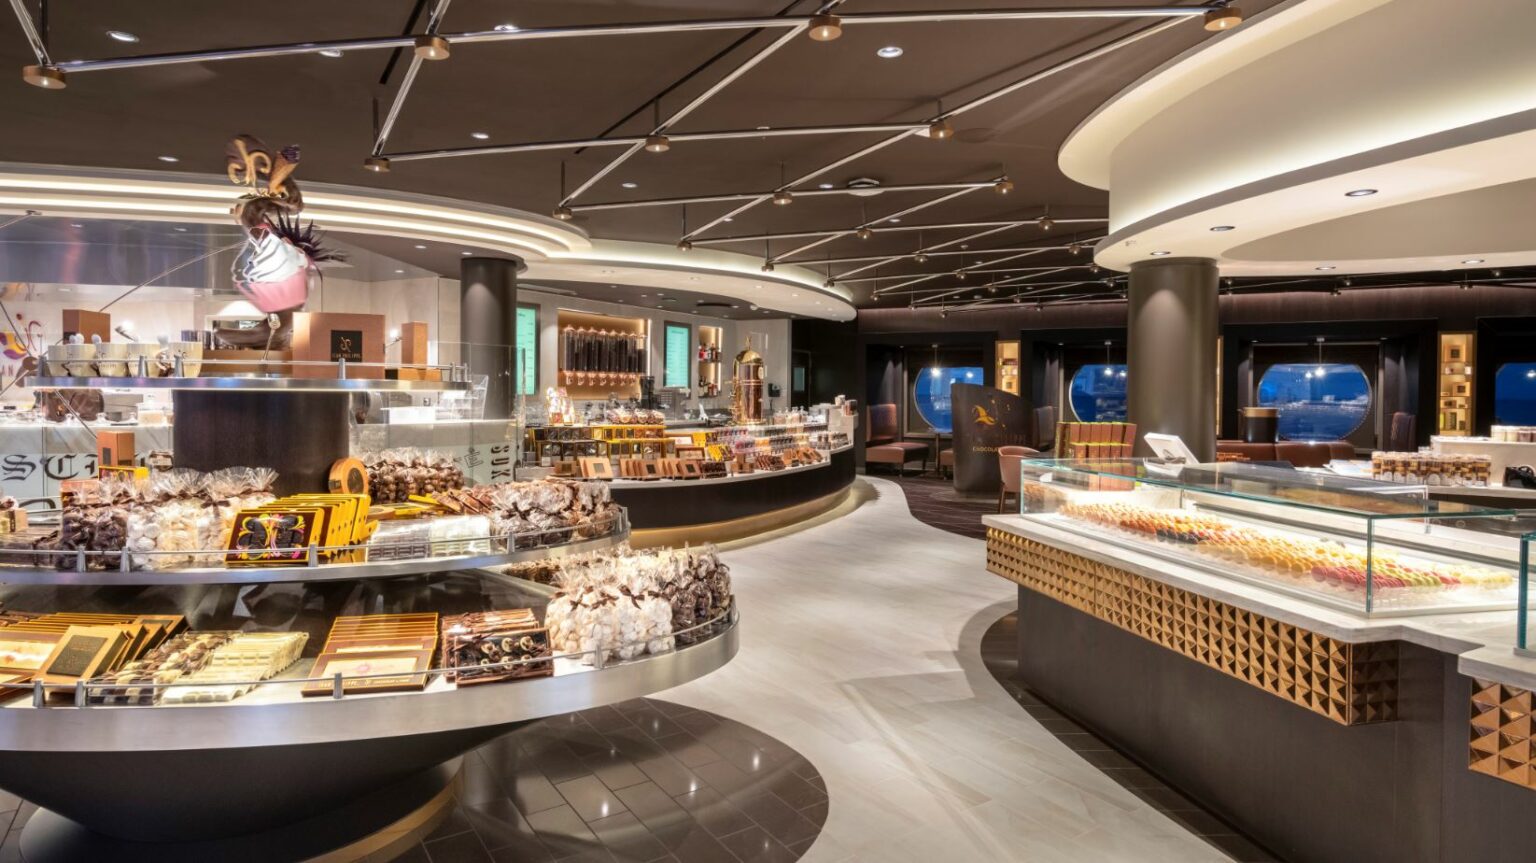 Six reasons why MSC Virtuosa offers the best edible escapism at sea